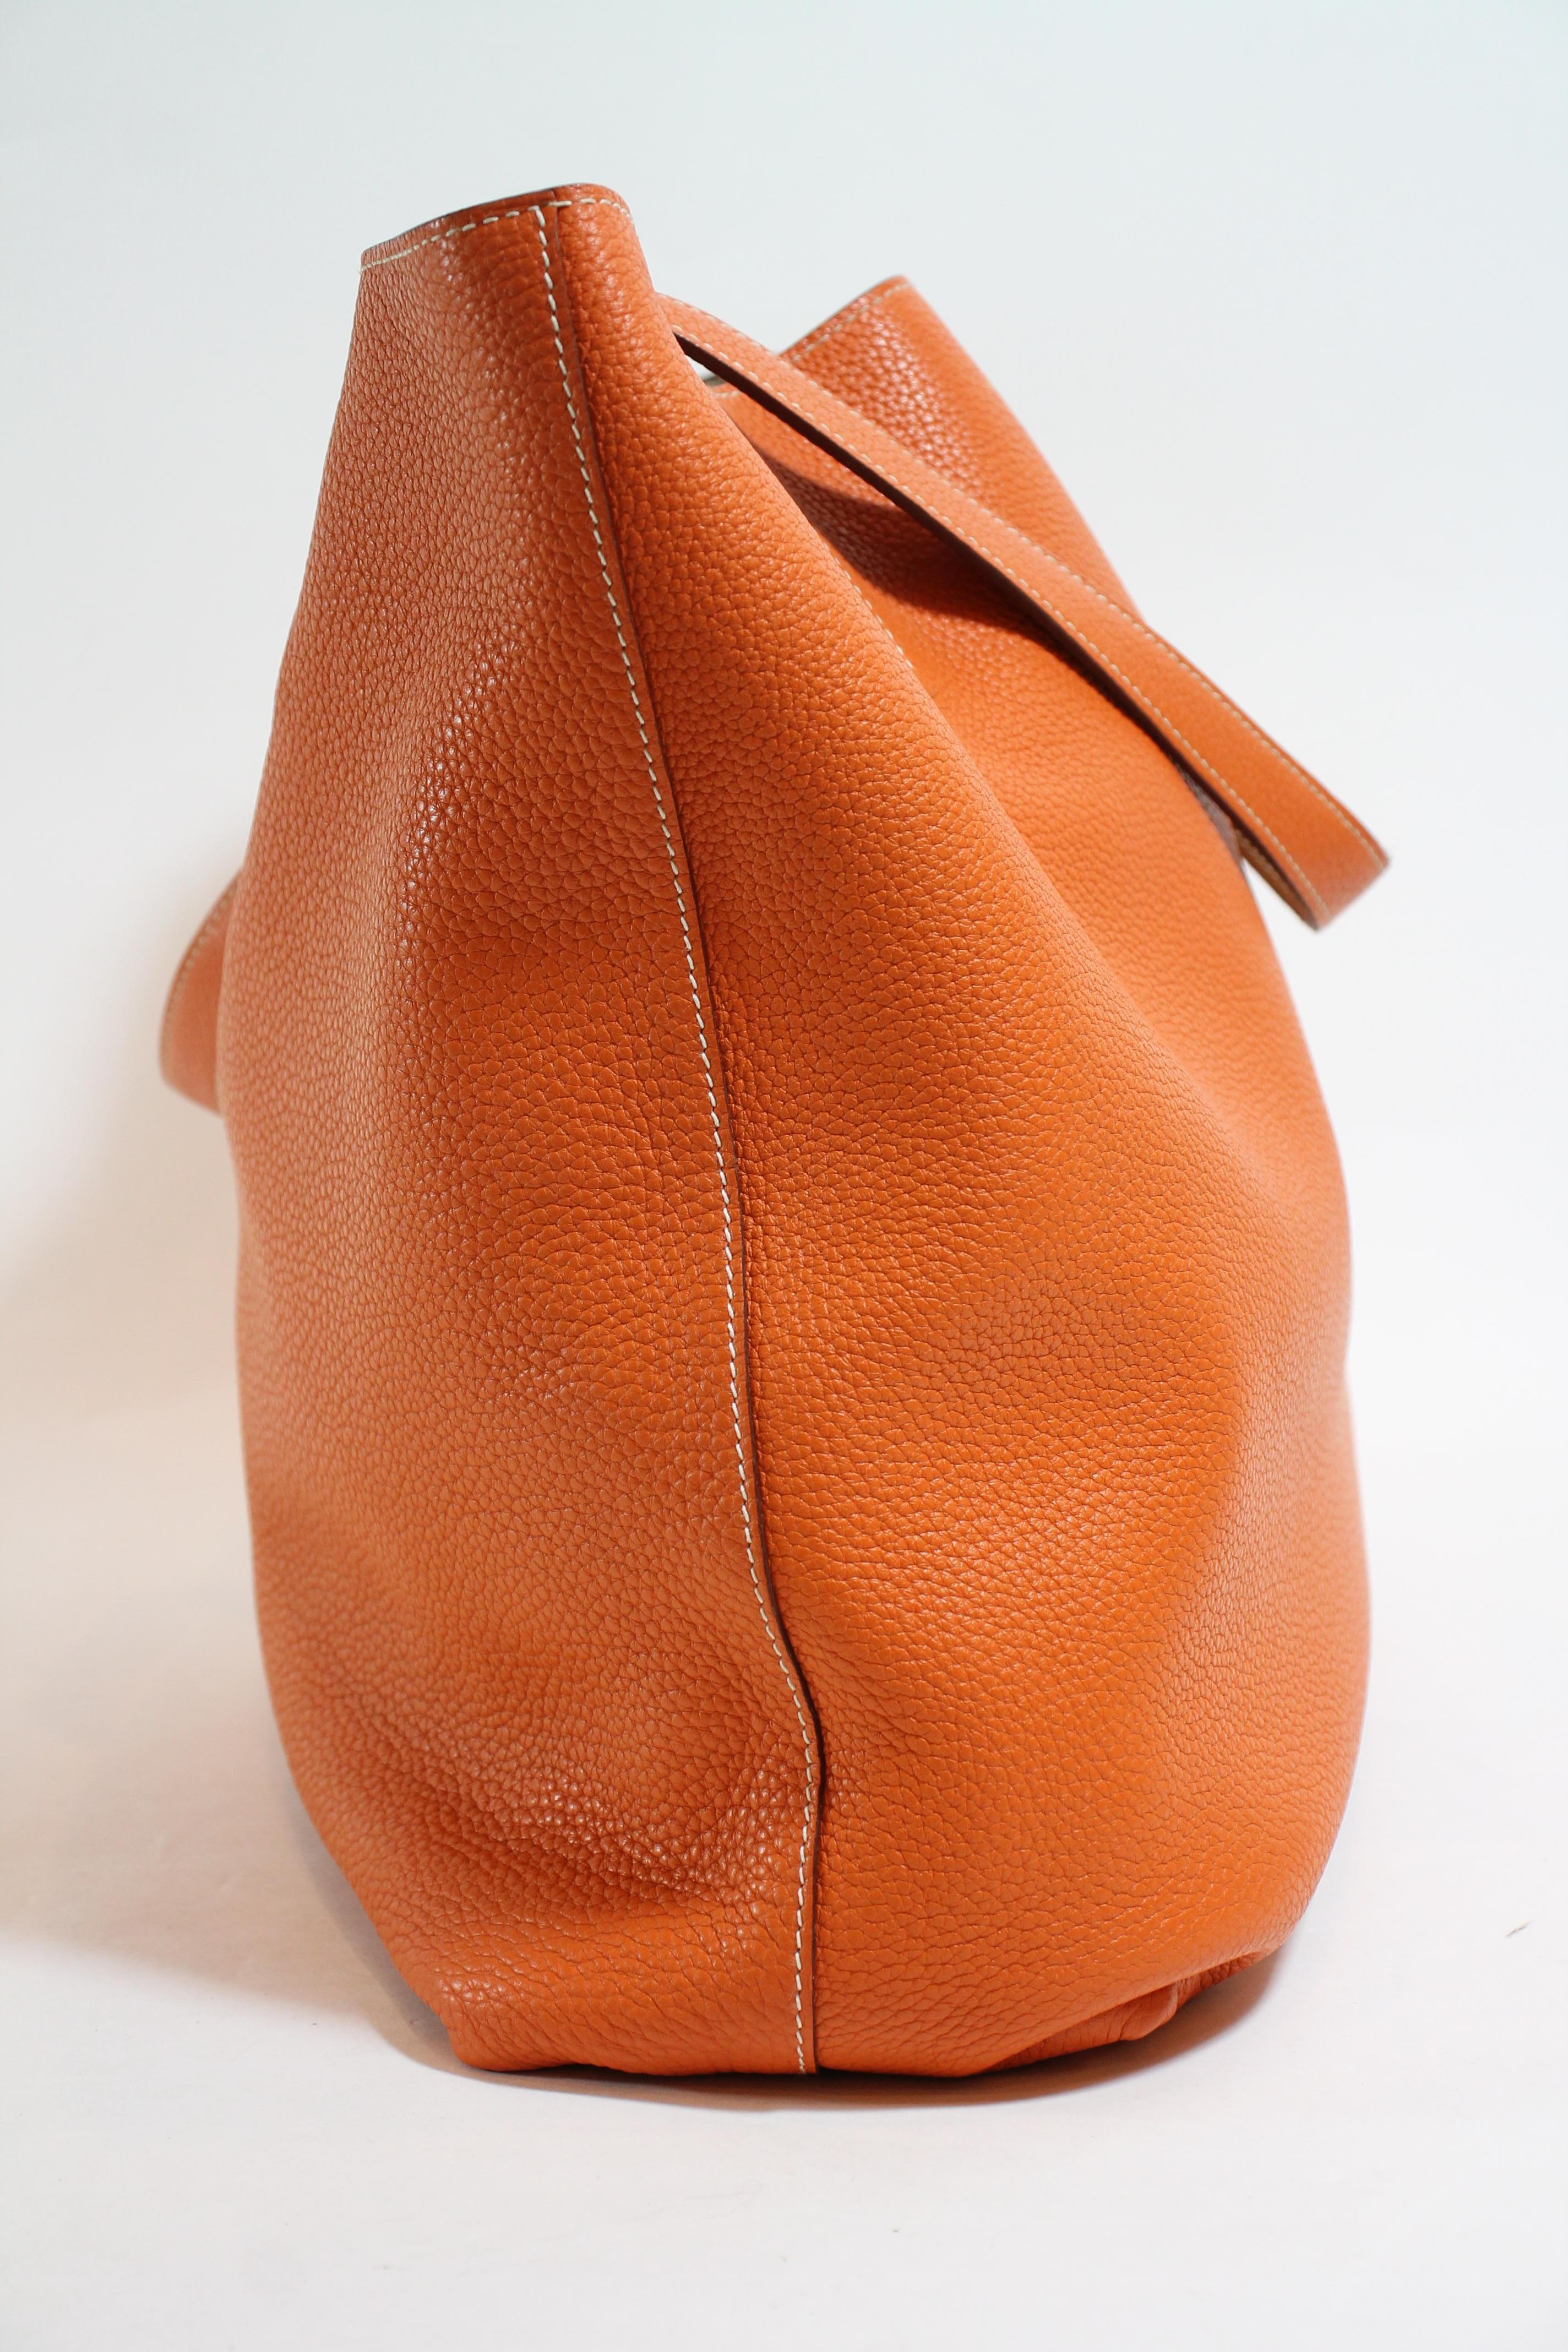 Orange d'H Clemence leather. Contrast stitching throughout. Open top. Dual flat shoulder straps. Foil-stamped logo accent at front face, Gold Clemence leather interior. Blind stamped.